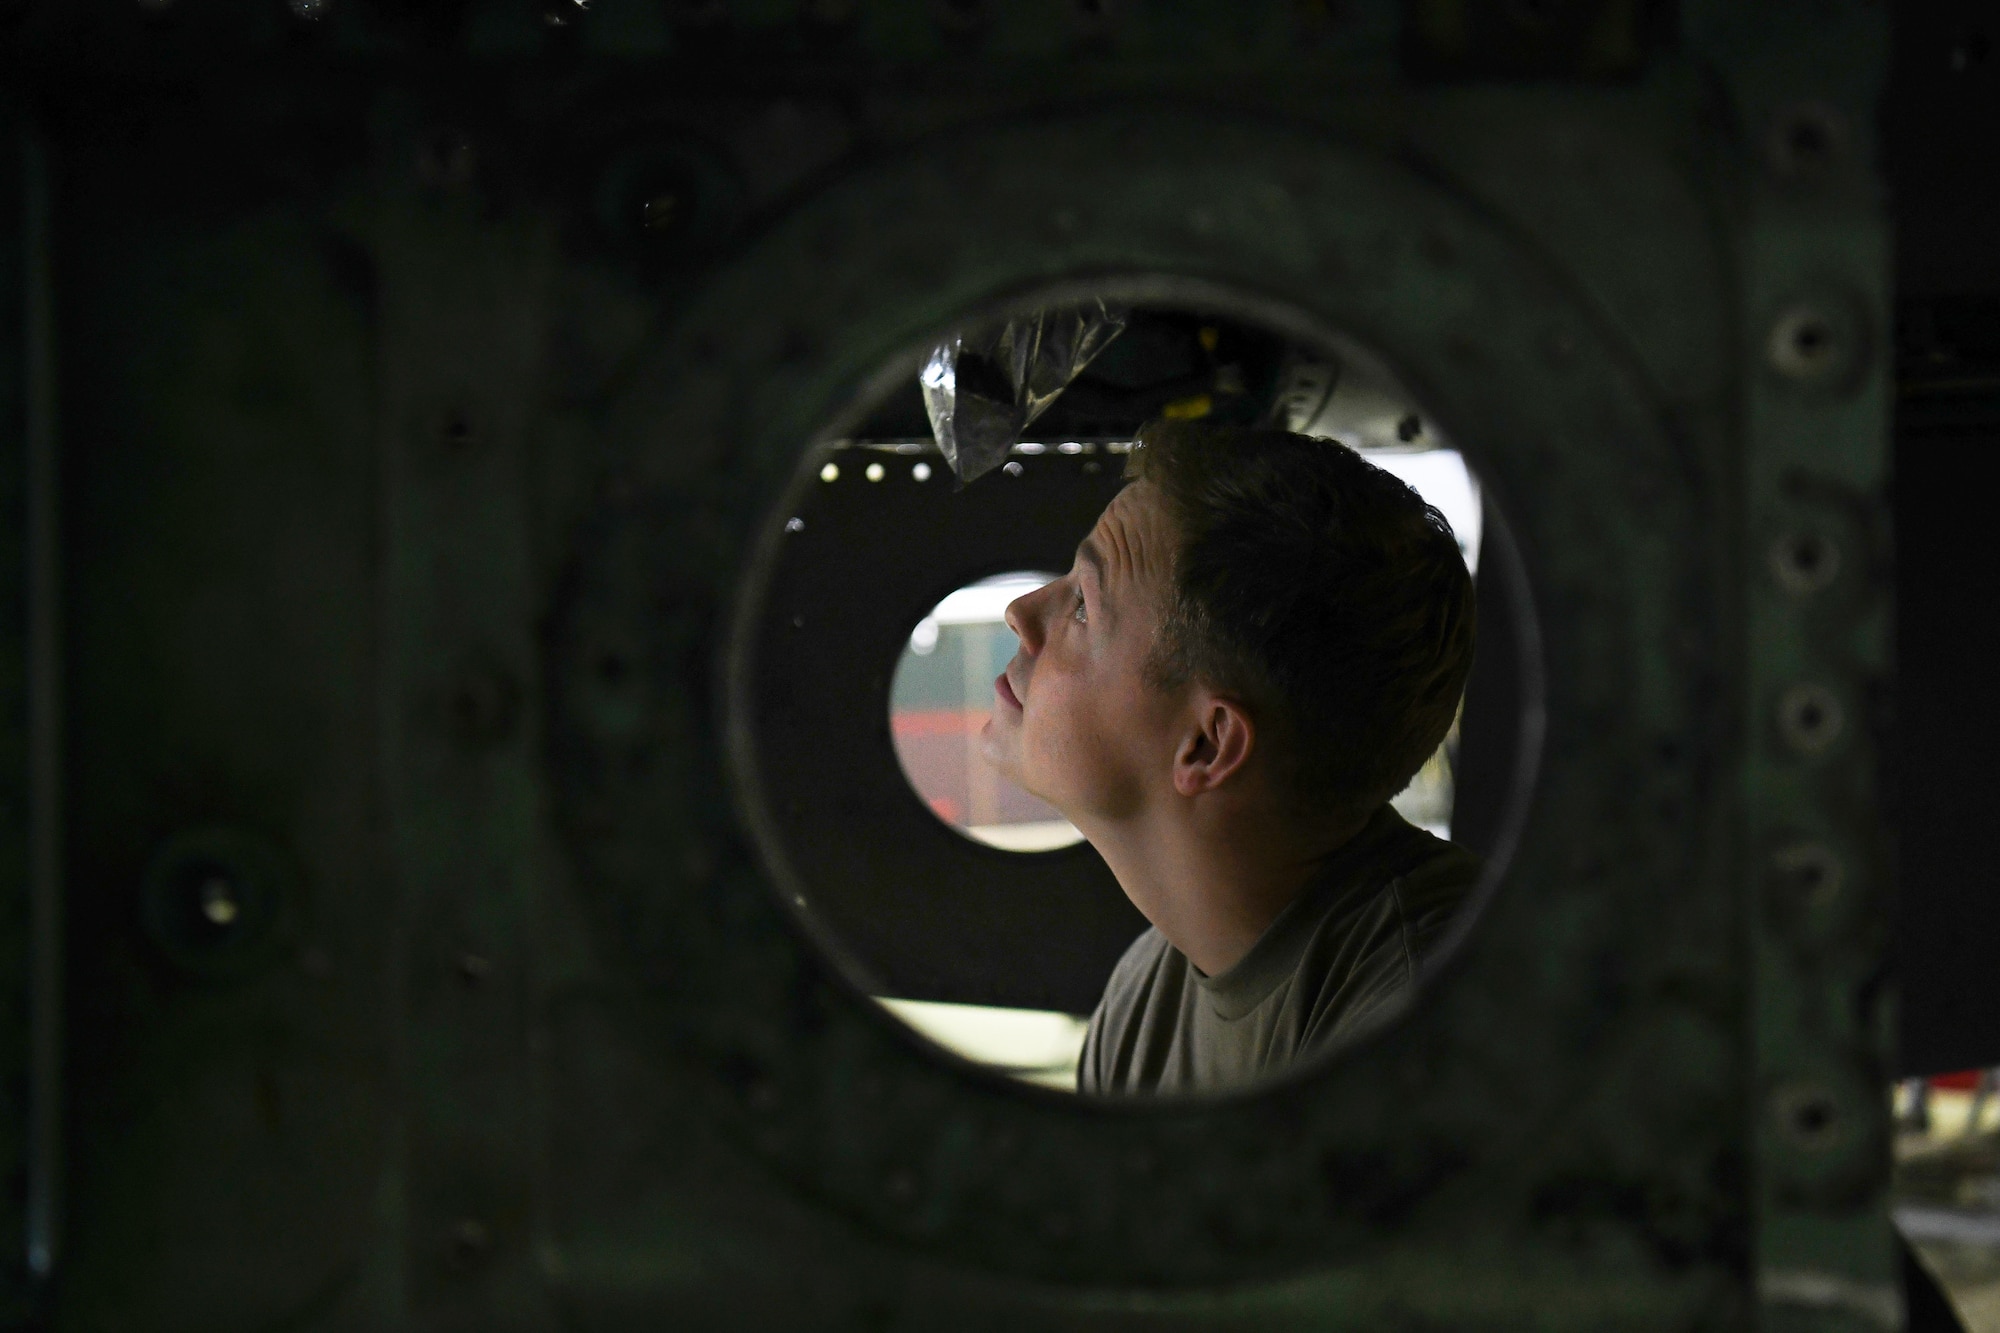 A crew chief assigned to the 48th Equipment Maintenance Squadron inspects an F-15 during a phase inspection at Royal Air Force Lakenheath, England, Aug. 13, 2019. The 48th EMS recently won the Innovation and Transformation Council award for developing and implementing a training and inspection readiness tool called “The Bird Book”. (U.S. Air Force photo by Airman 1st Class Shanice Williams-Jones)